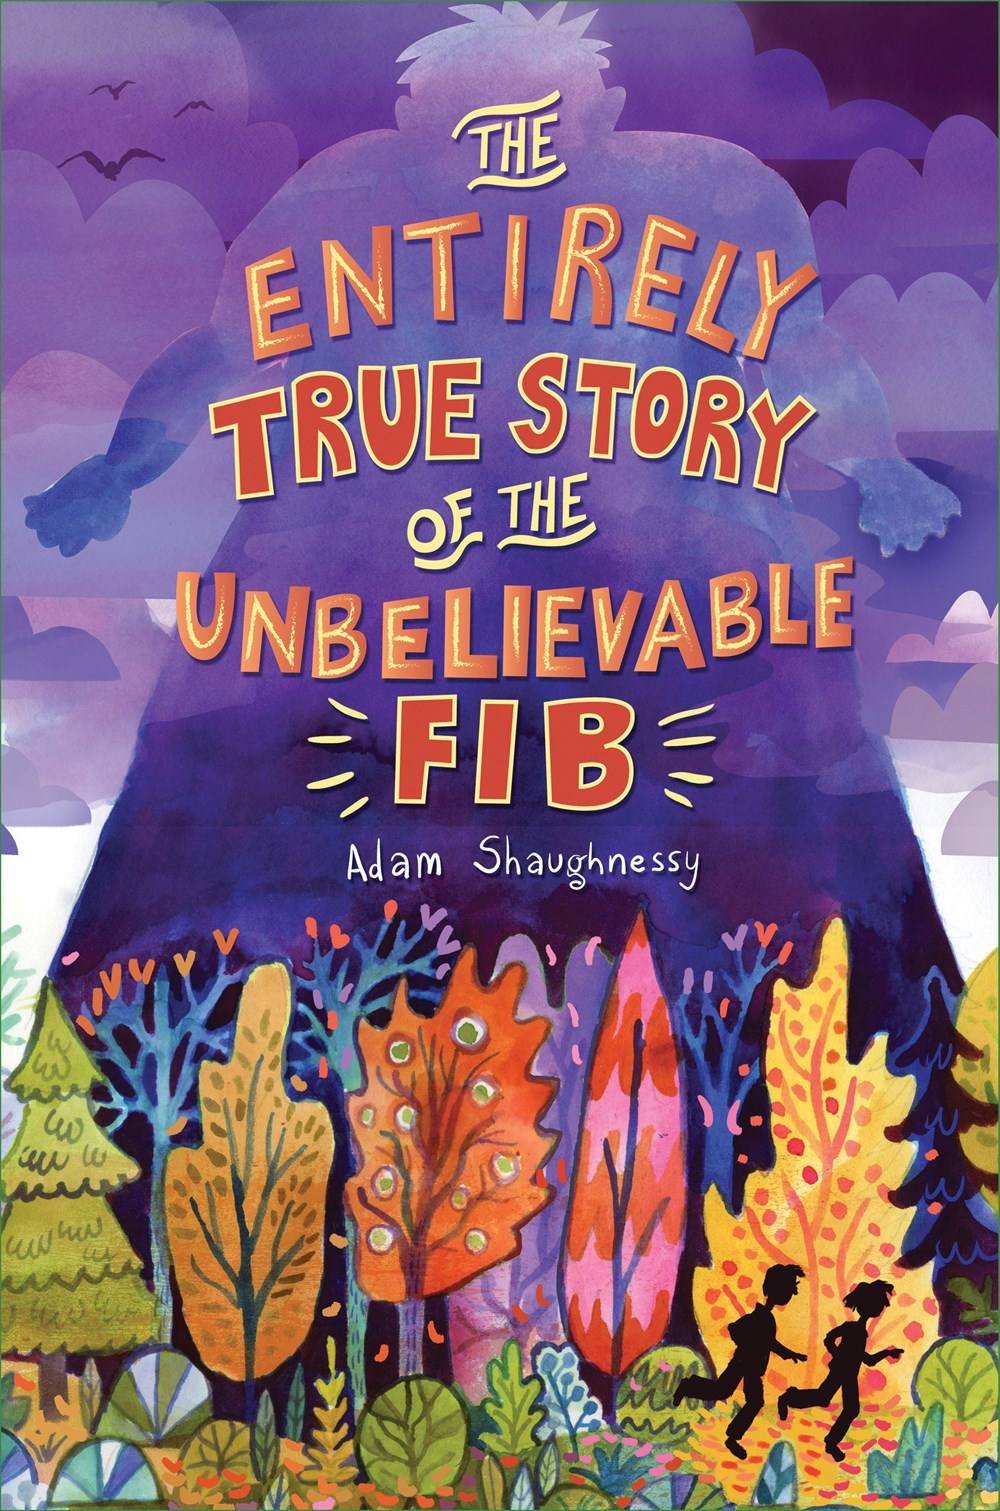 The Entirely True Story of the - Adam Shaughnessy